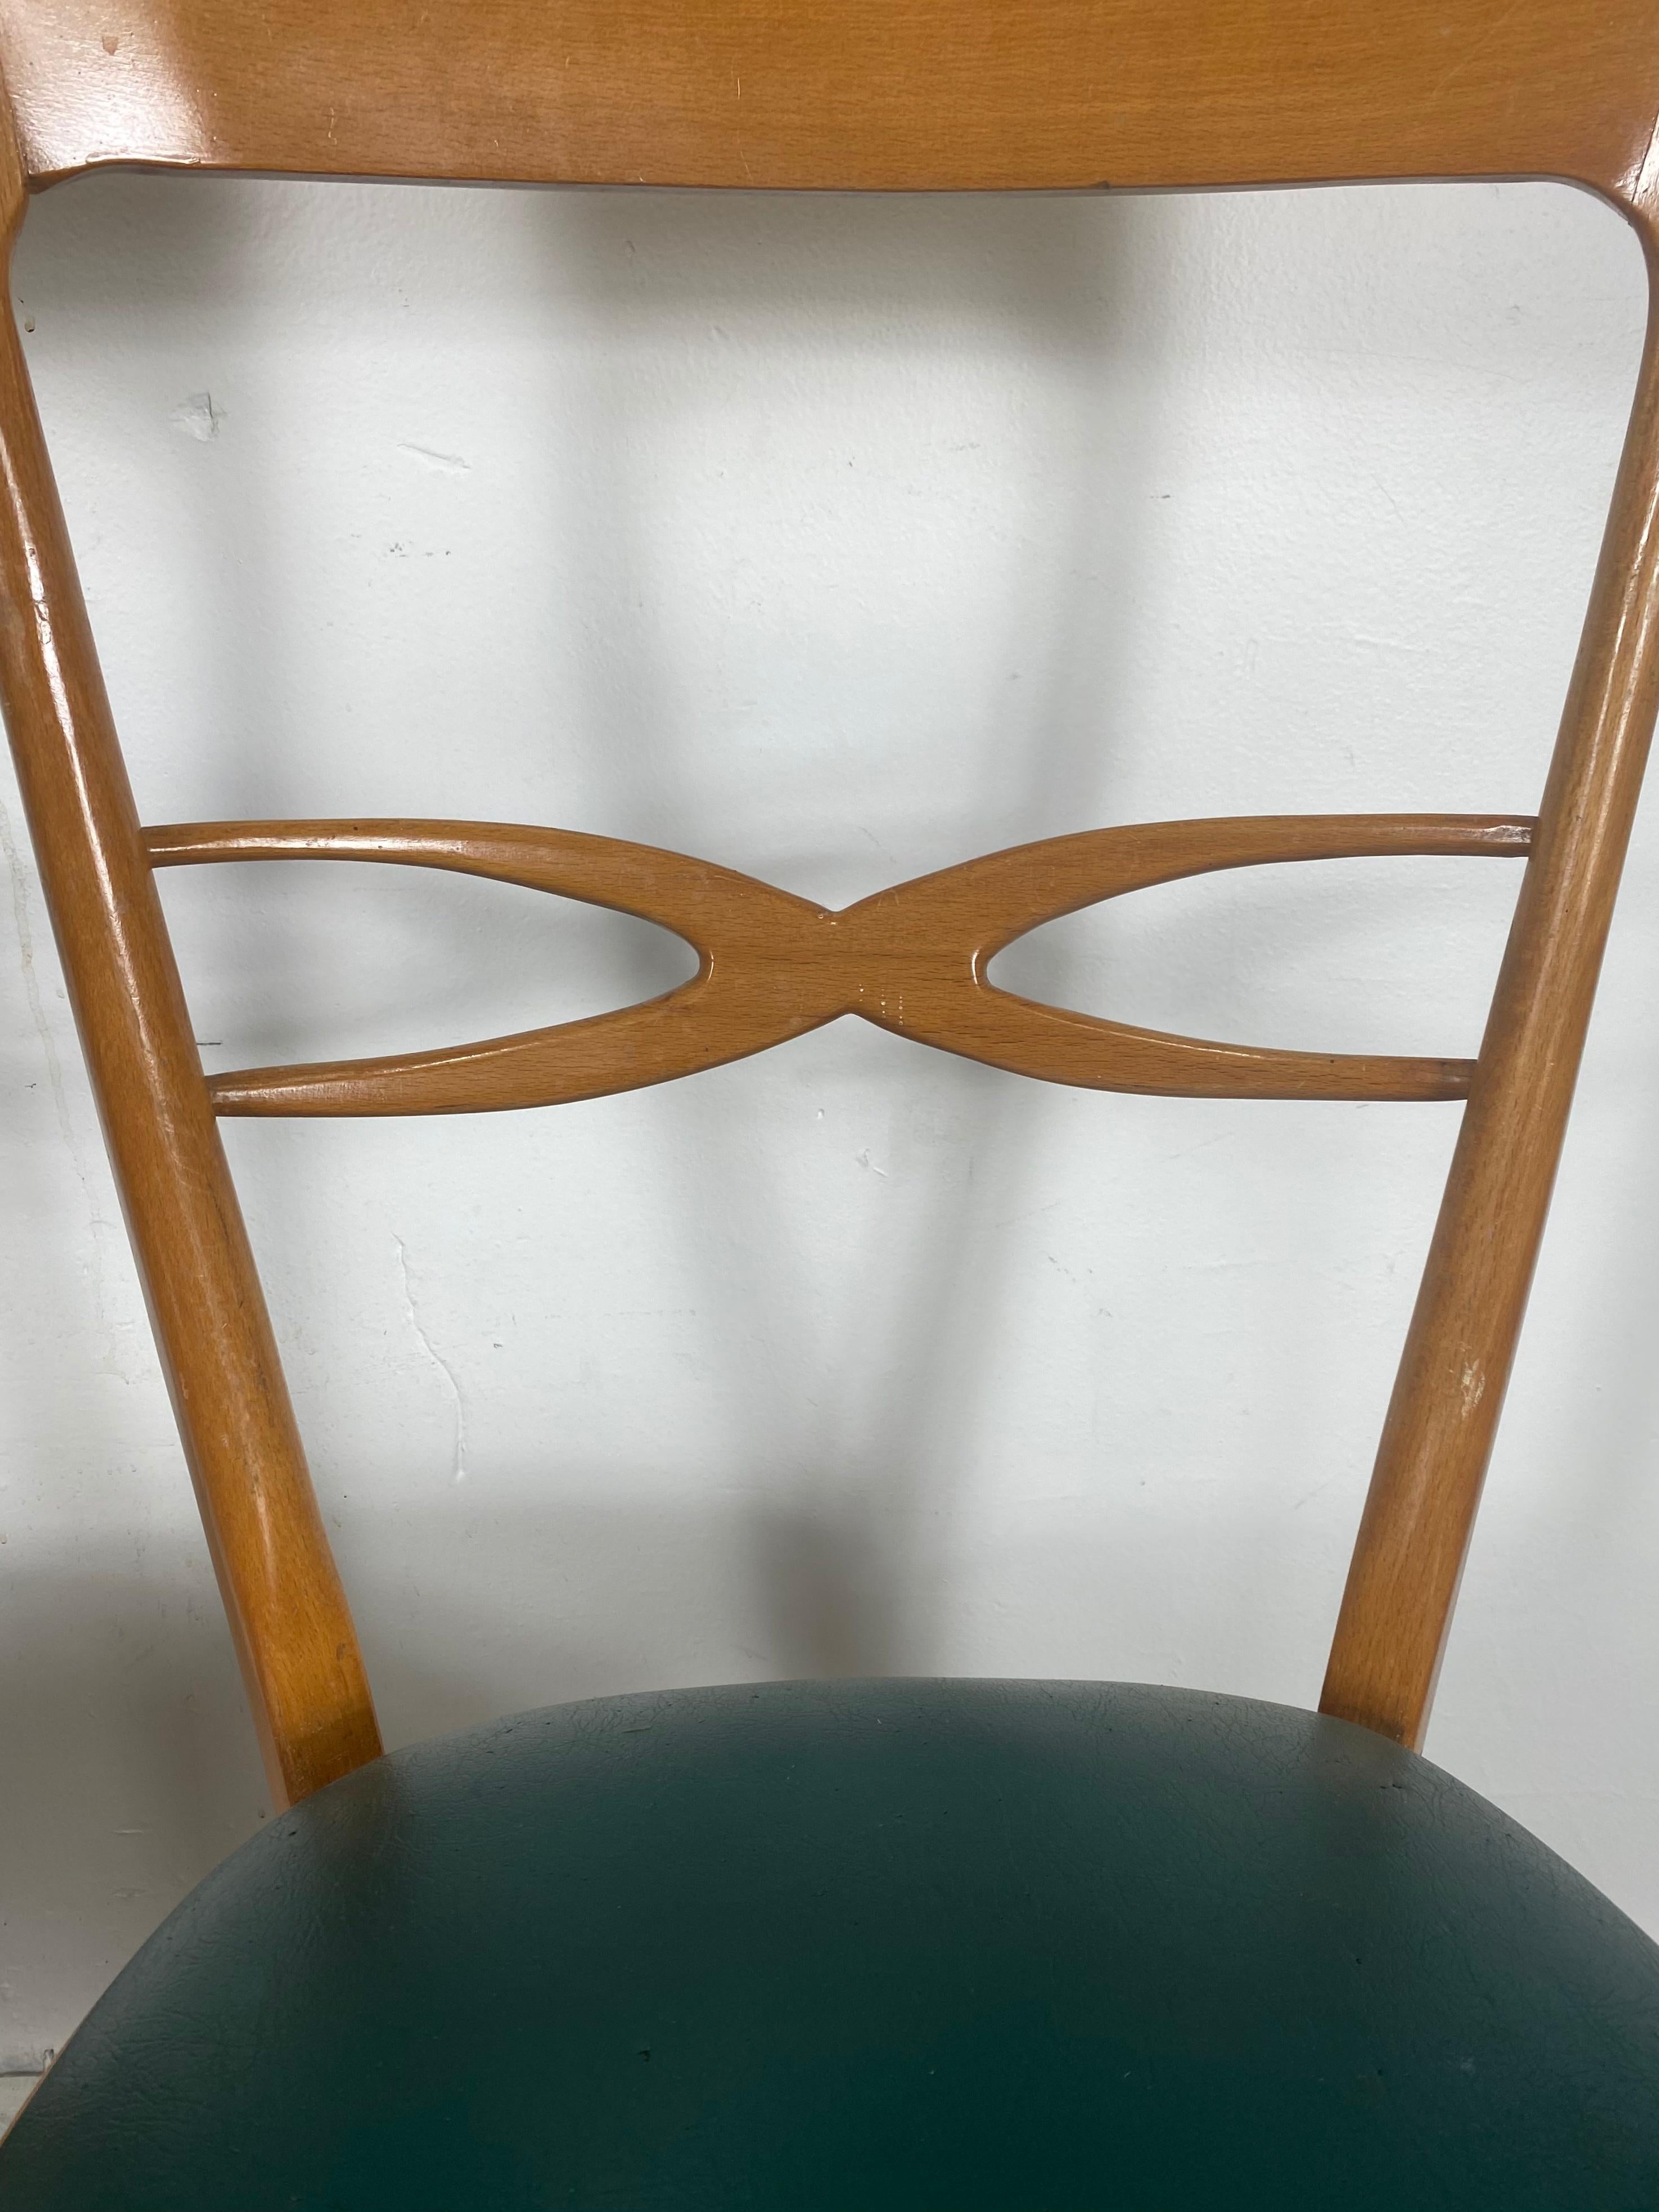 Set 6 Mid Century Modernist Italian Dining Chairs, Early 1950s, Beech Wood 1